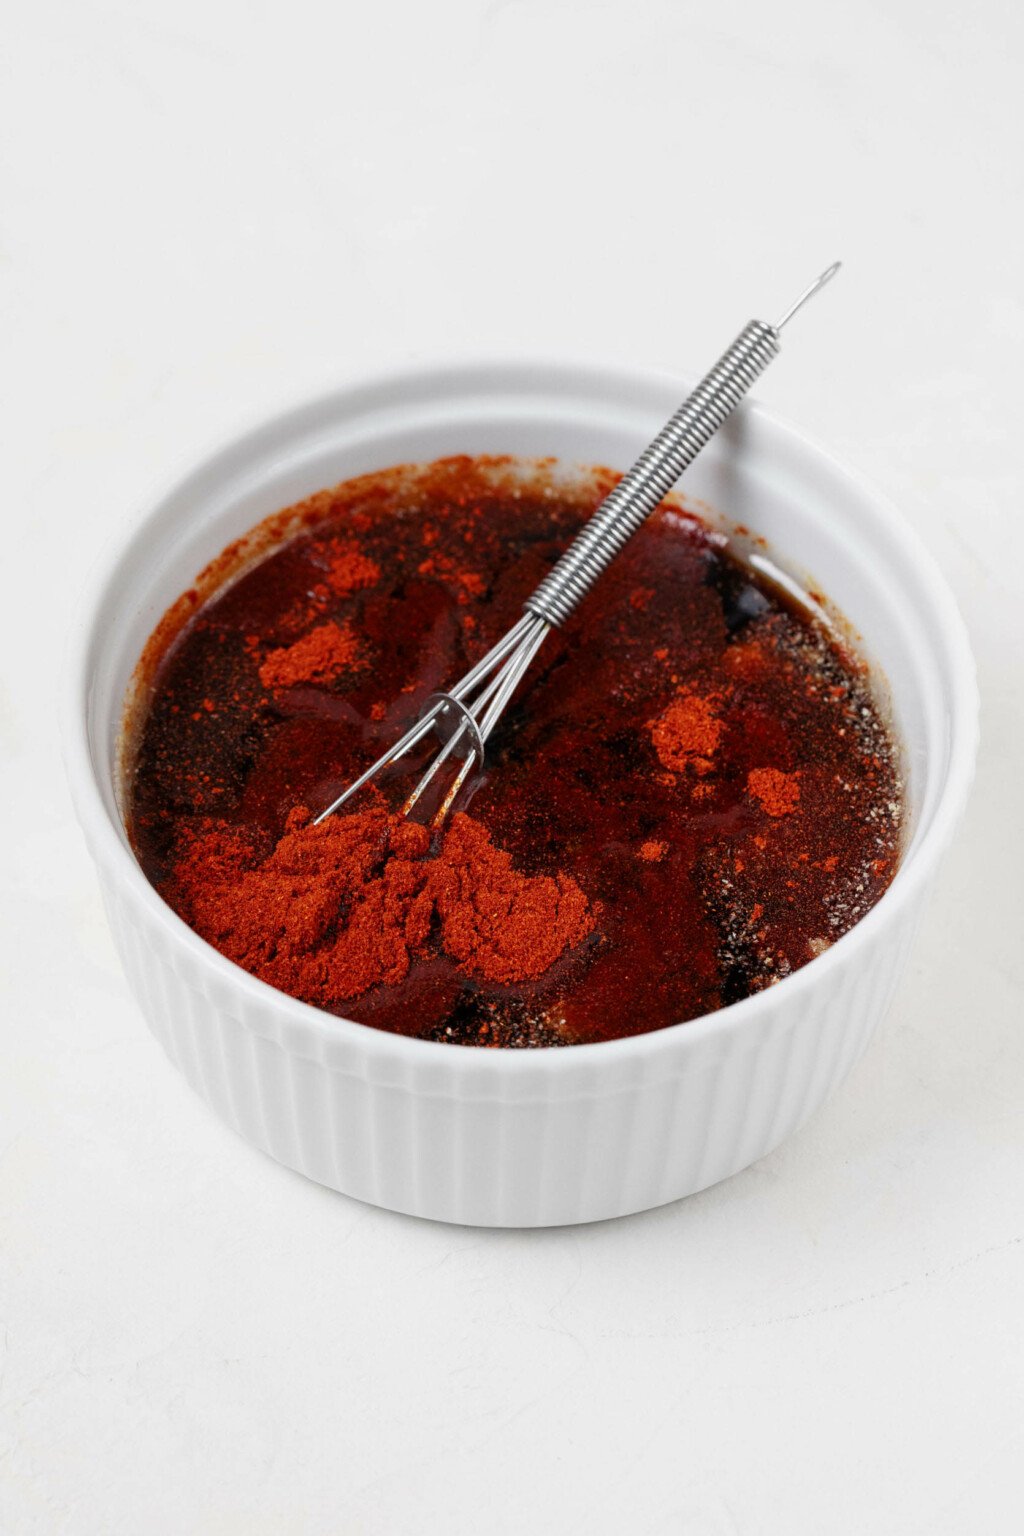 A round, white ramekin is filled with a liquid mixture that's being whisked together. Smoked paprika is visible, turning the marinade a red color.